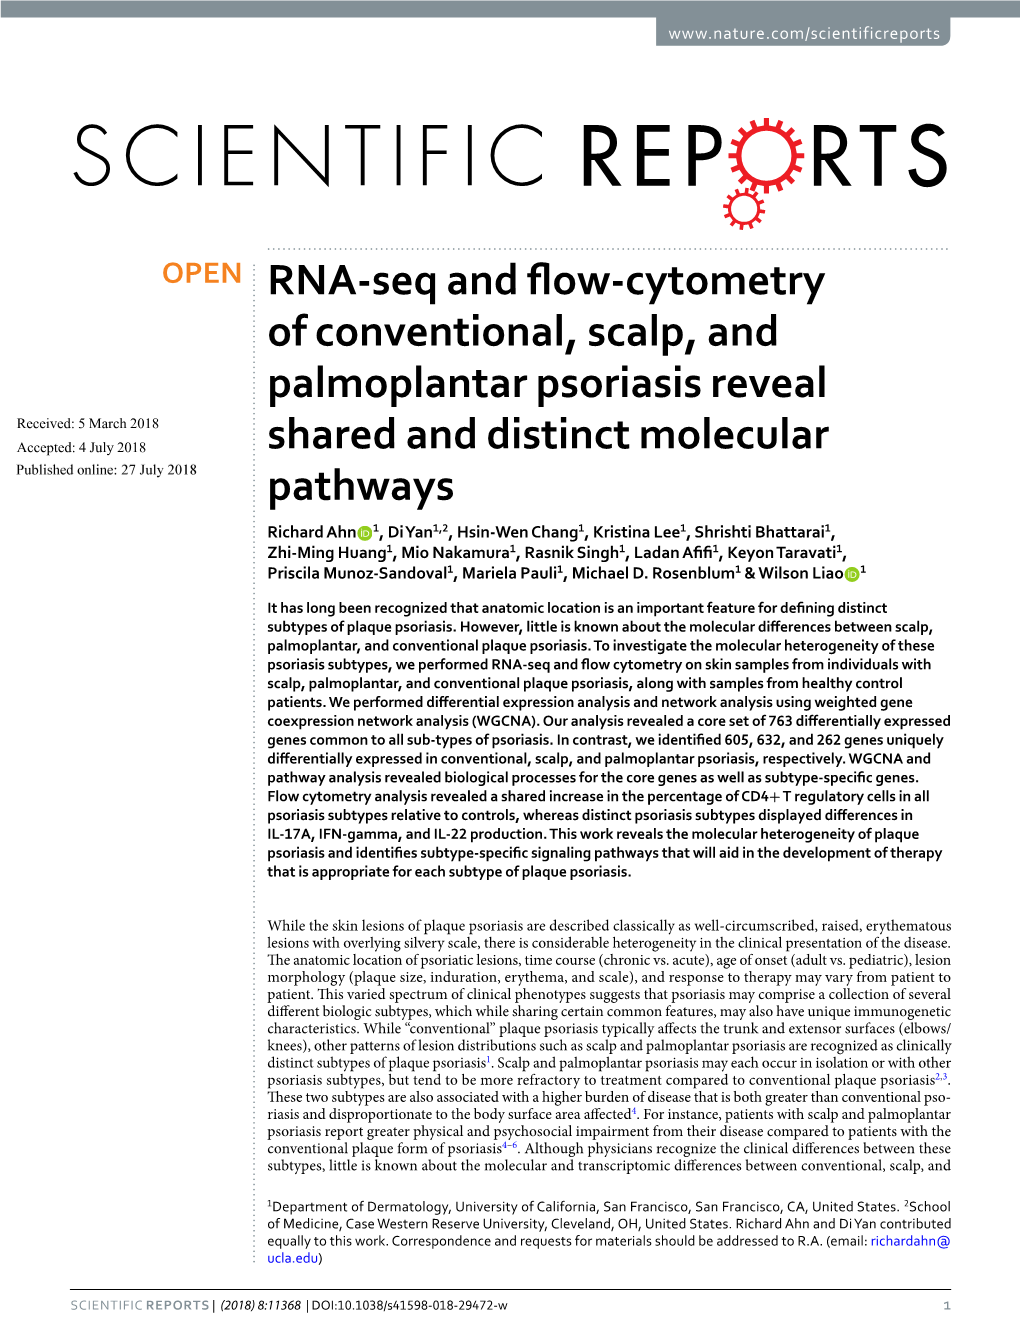 RNA-Seq and Flow-Cytometry of Conventional, Scalp, And